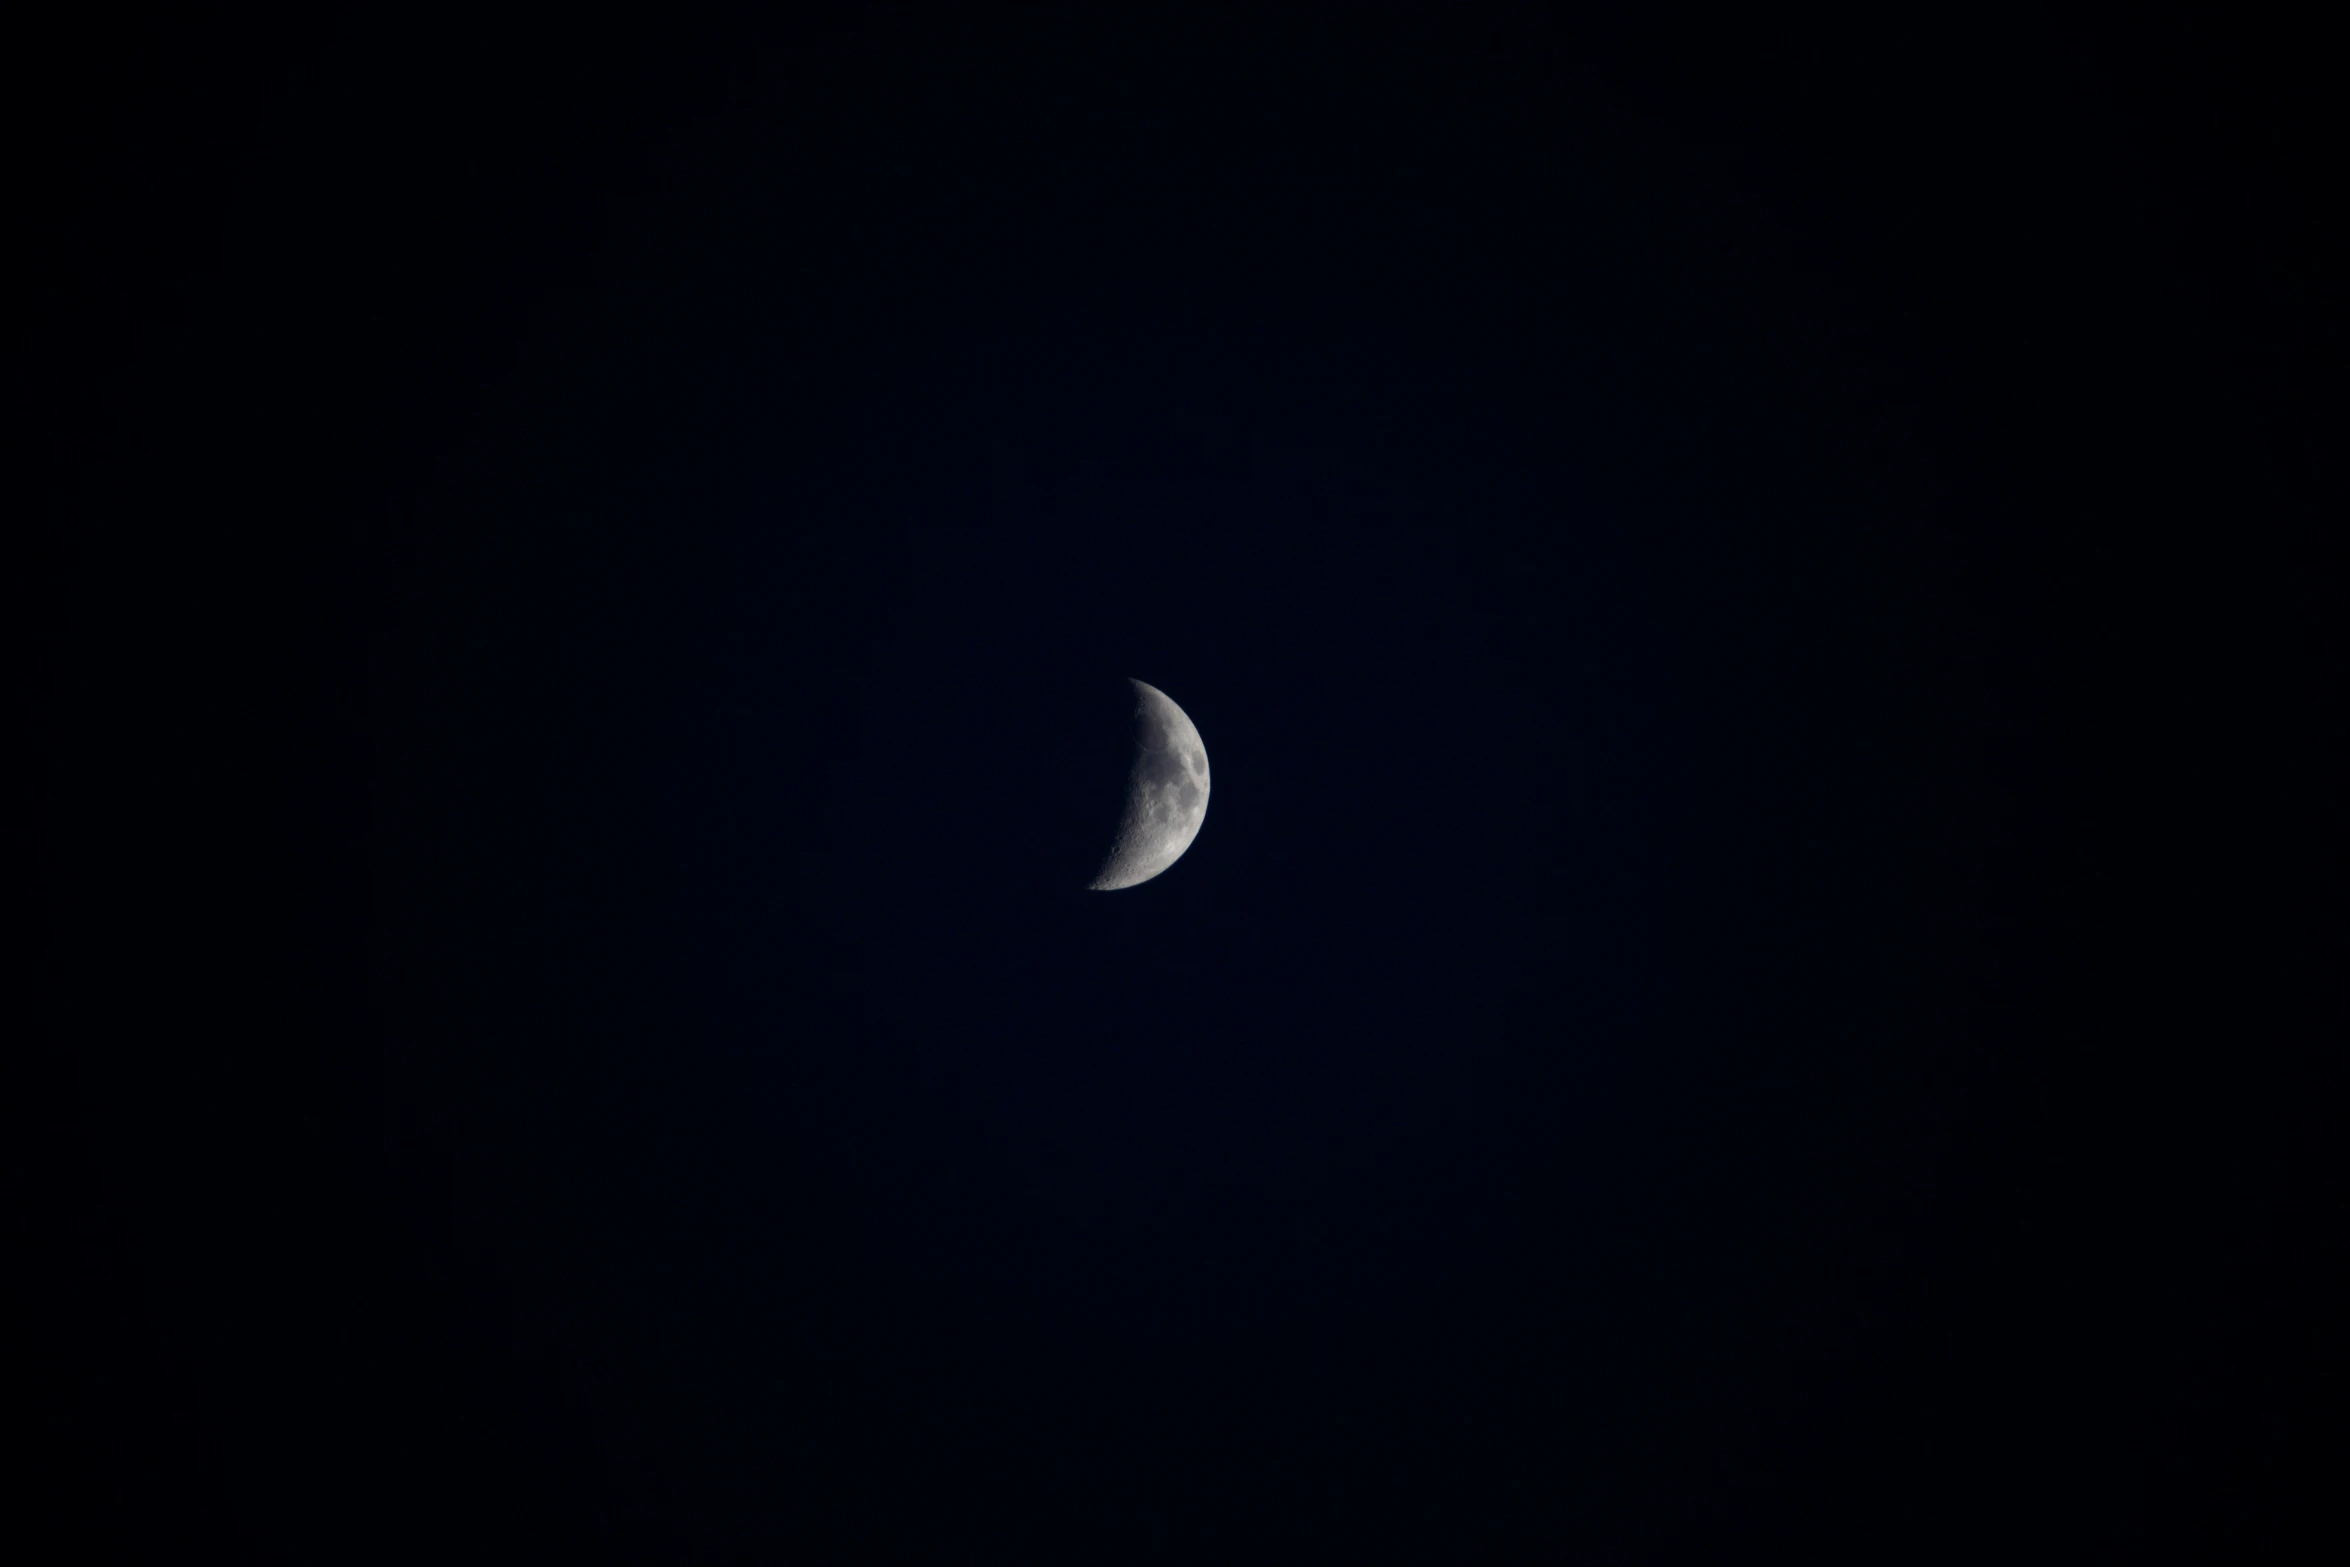 a half - moon is seen during the night sky